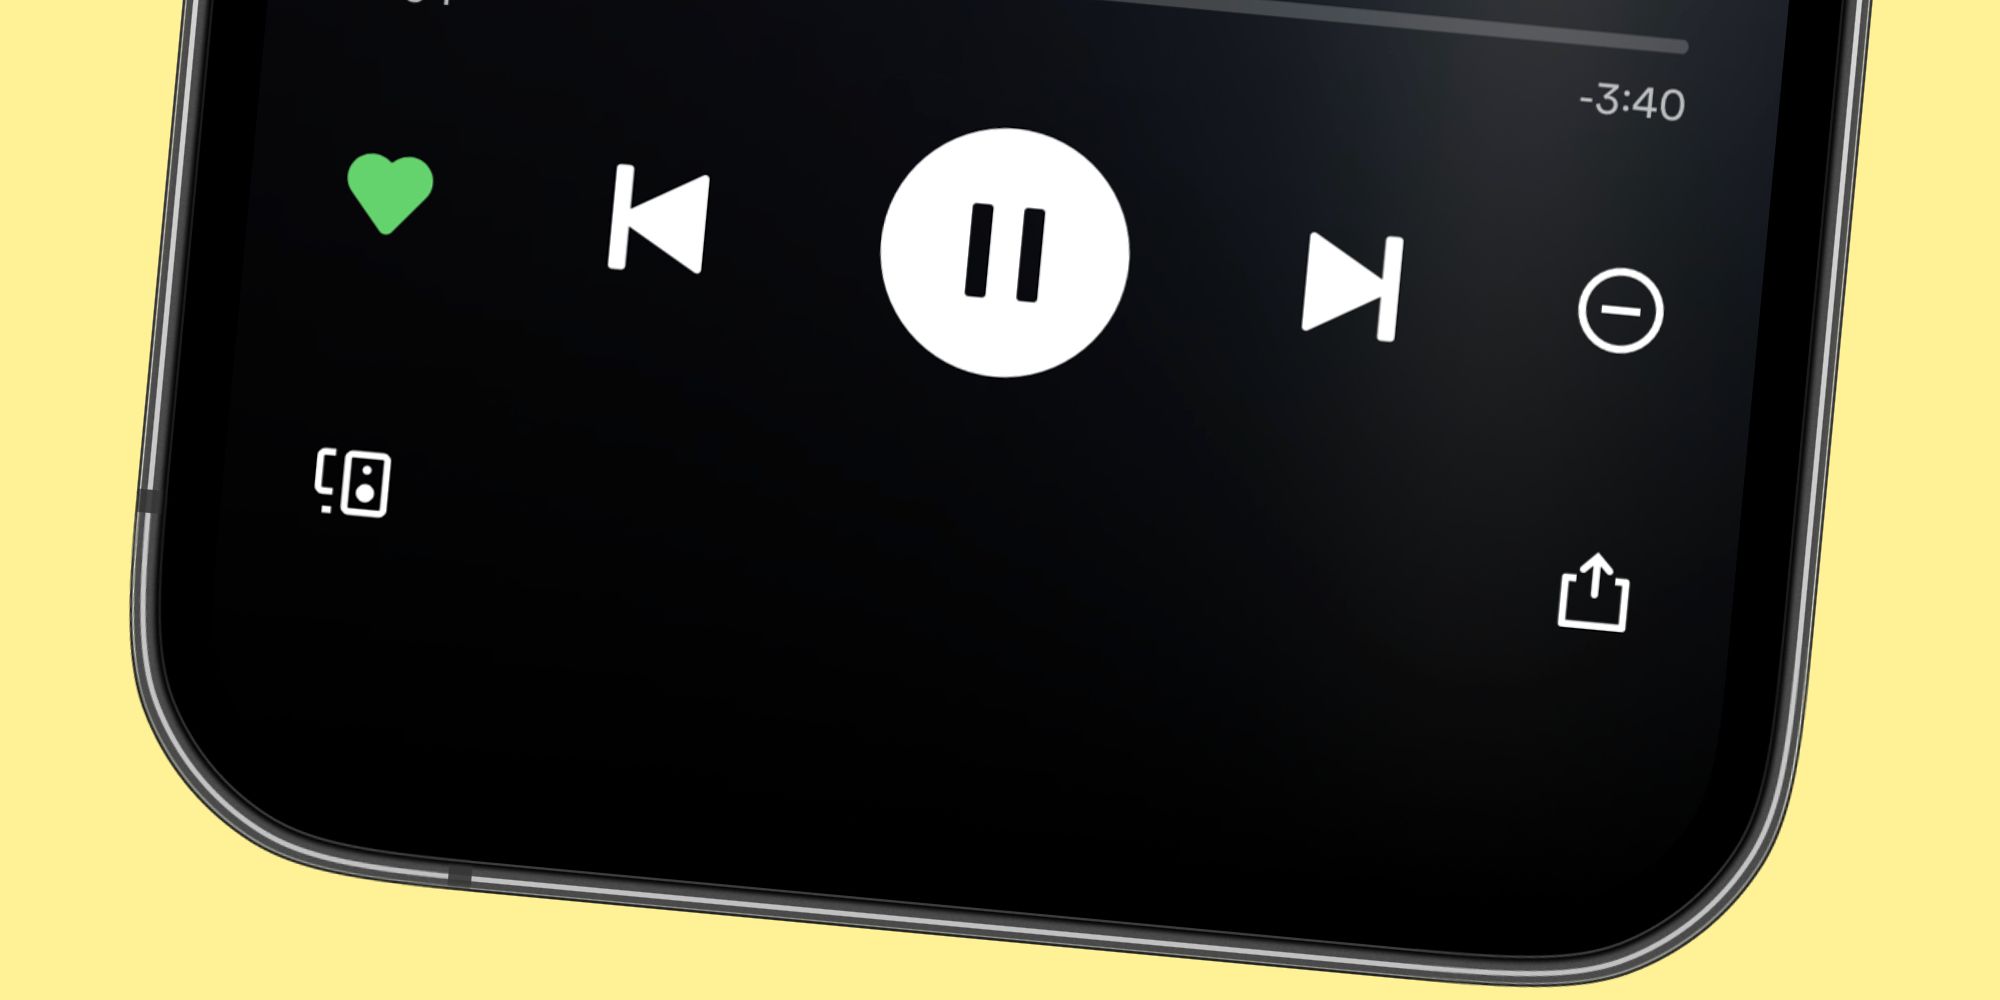 Spotify's 'dislike' button on the app for a Spotify Free user